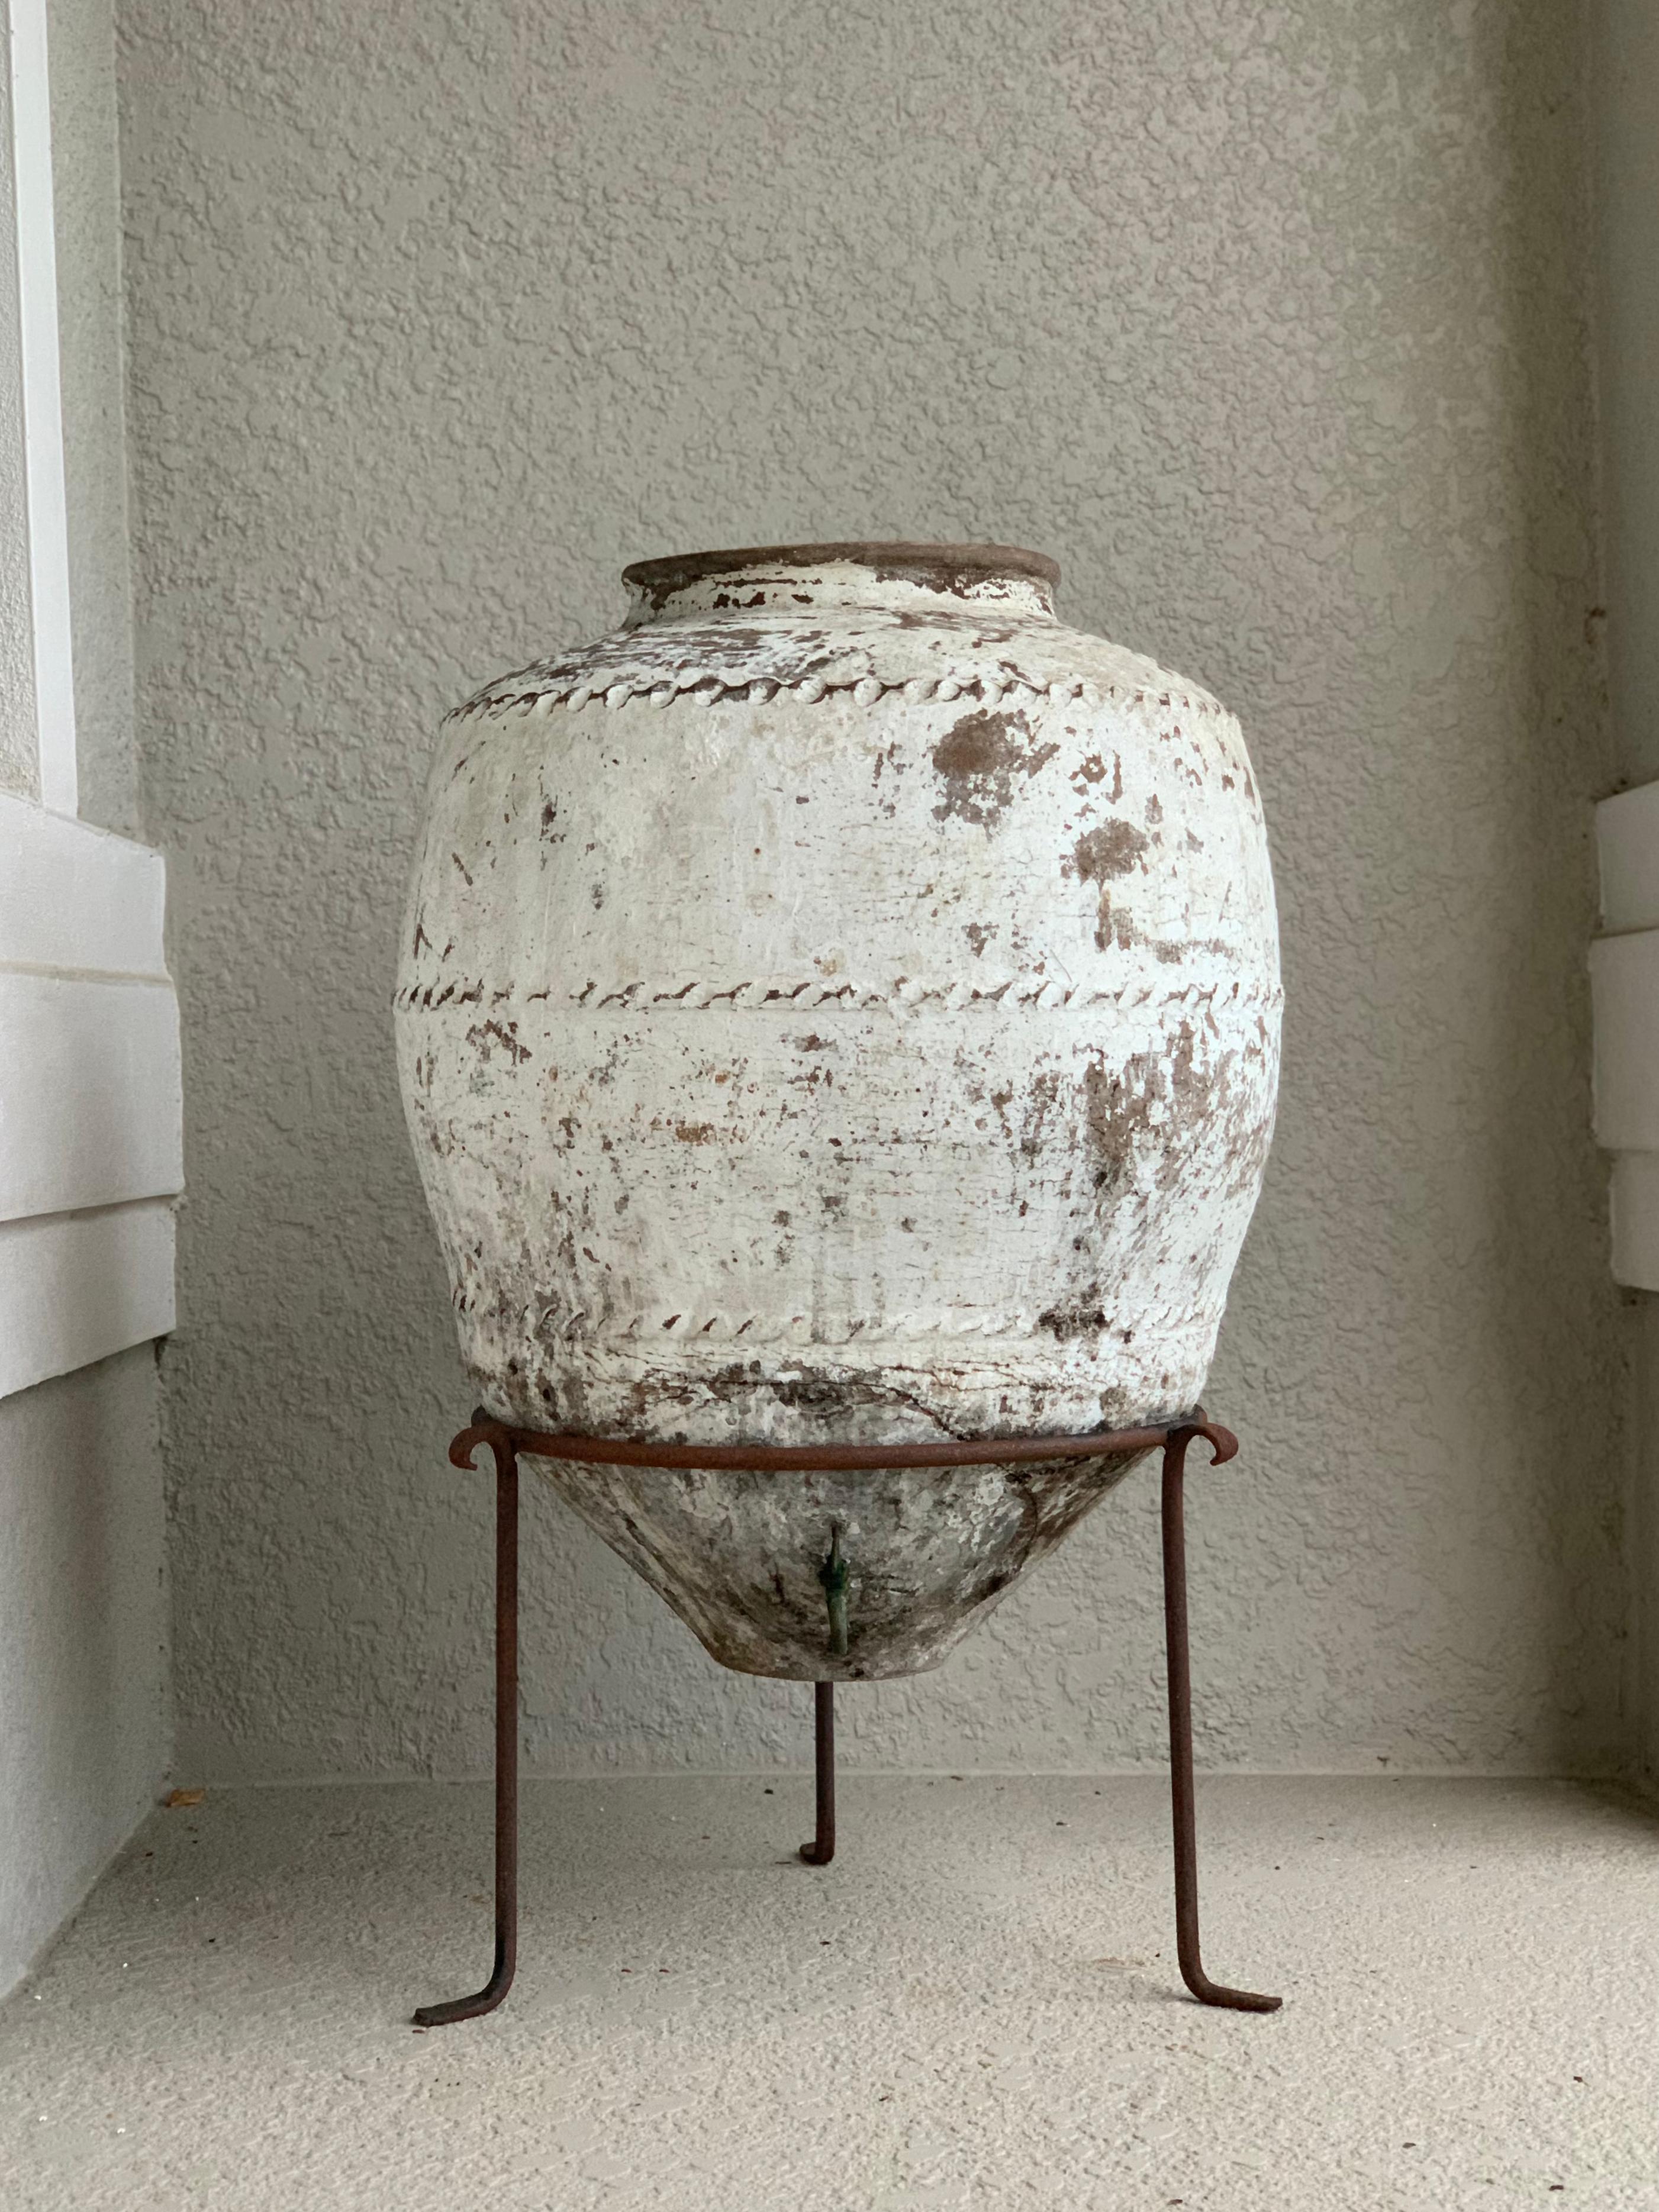 Spanish Colonial Rare 19th c. Antique Terracotta Water Urn with Iron Spout, Whitewashed Patina For Sale